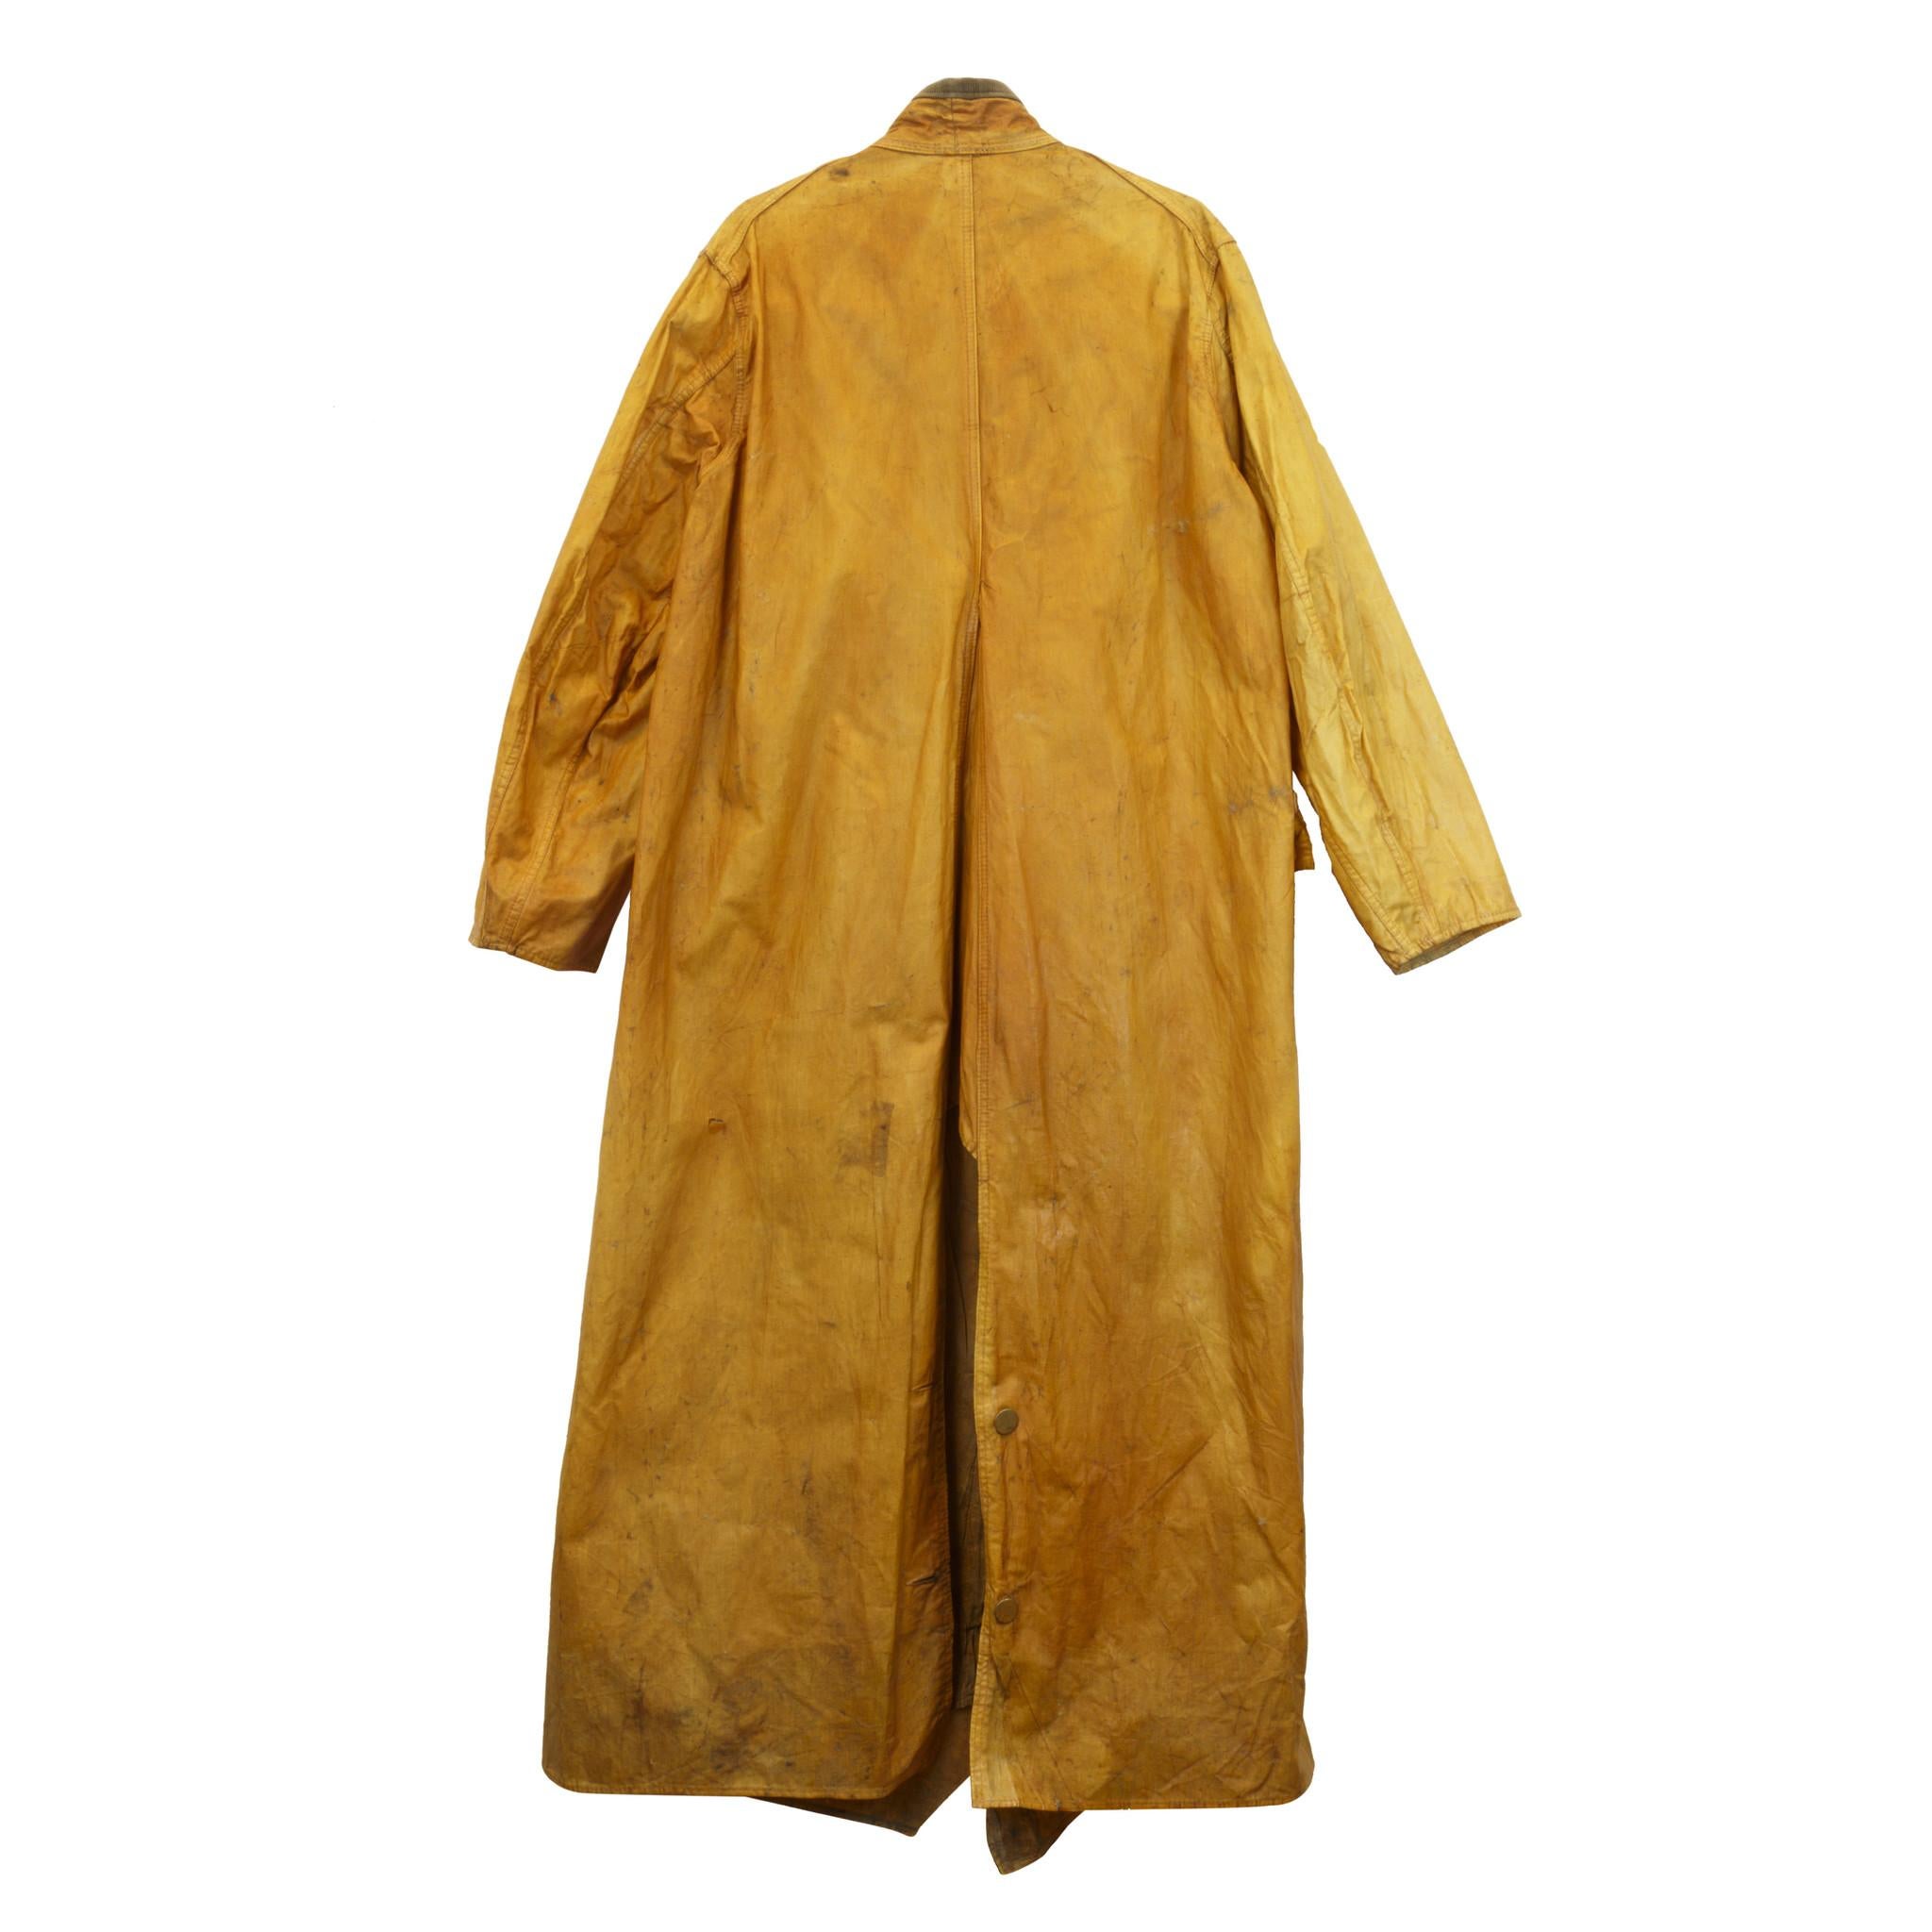 Yellow oil cloth cowboy slicker with slit back outside pockets and brass buttons. Corduroy collar, no makers mark but there were only 3 makers.

Period: Last quarter of the 19th century.

Origin: Western

Size: Large; 46-18.

Family Owned &